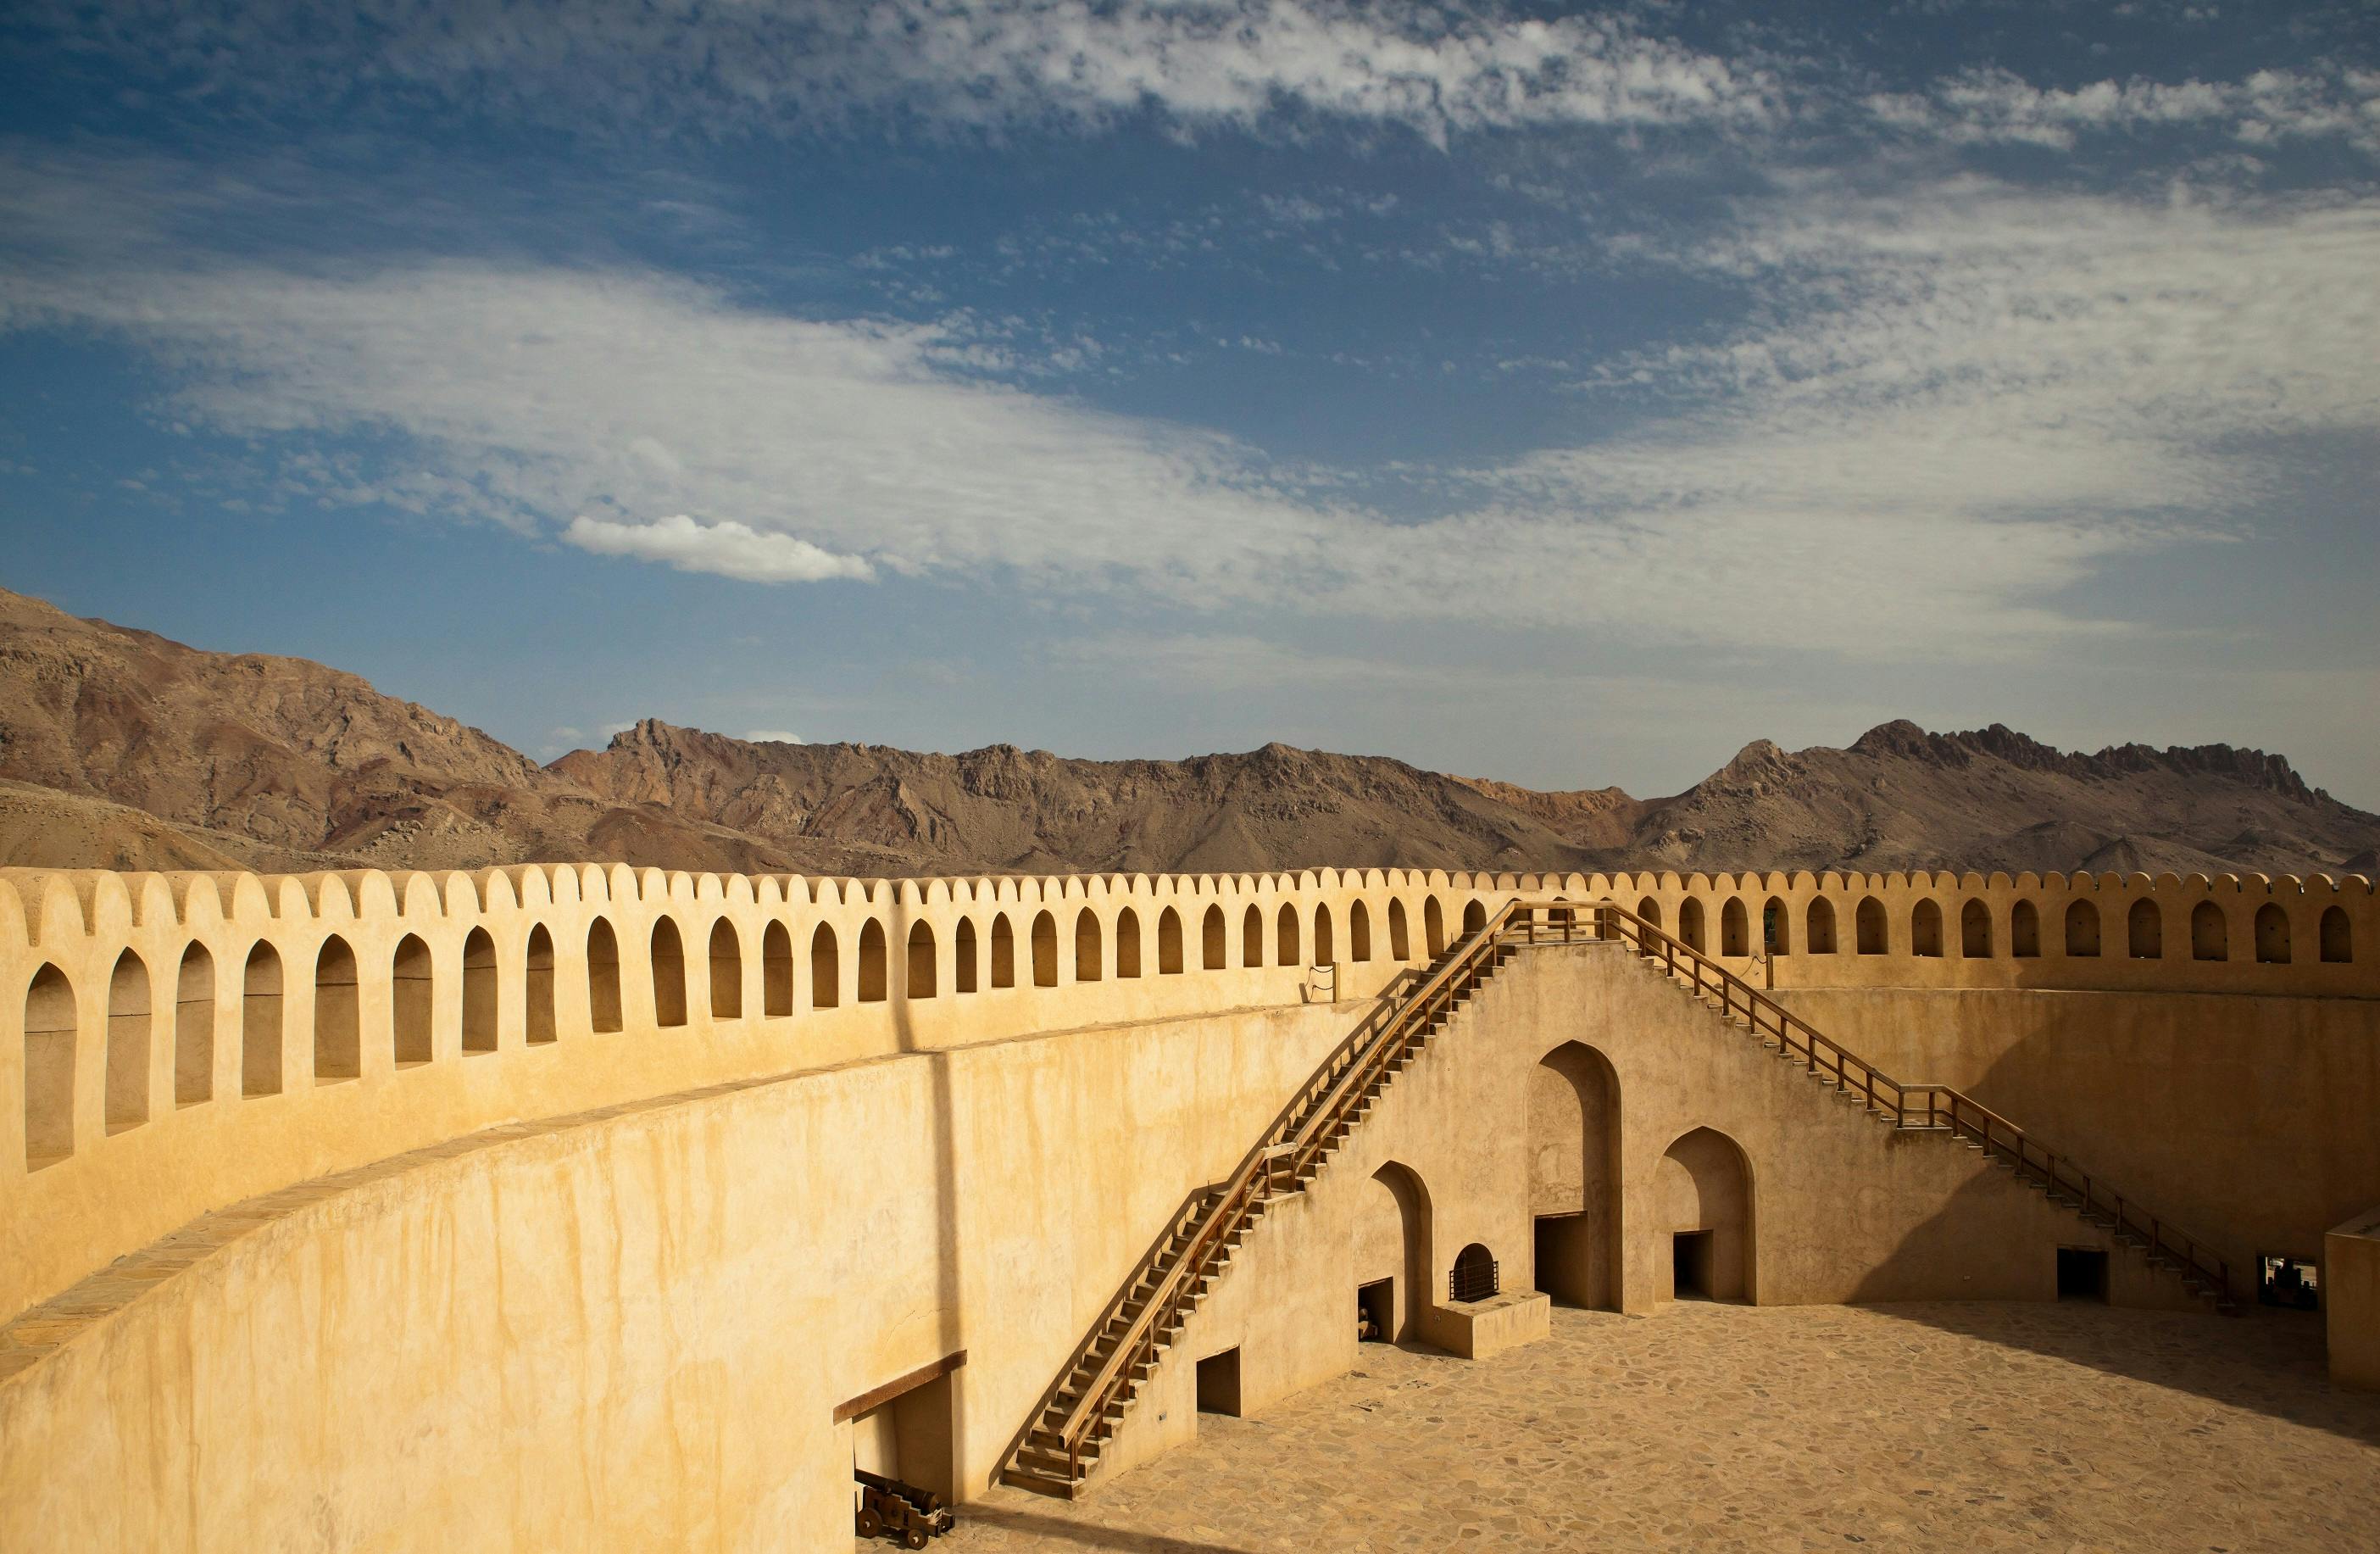 Full-day private tour to Nizwa including Bahla and Jabrin forts